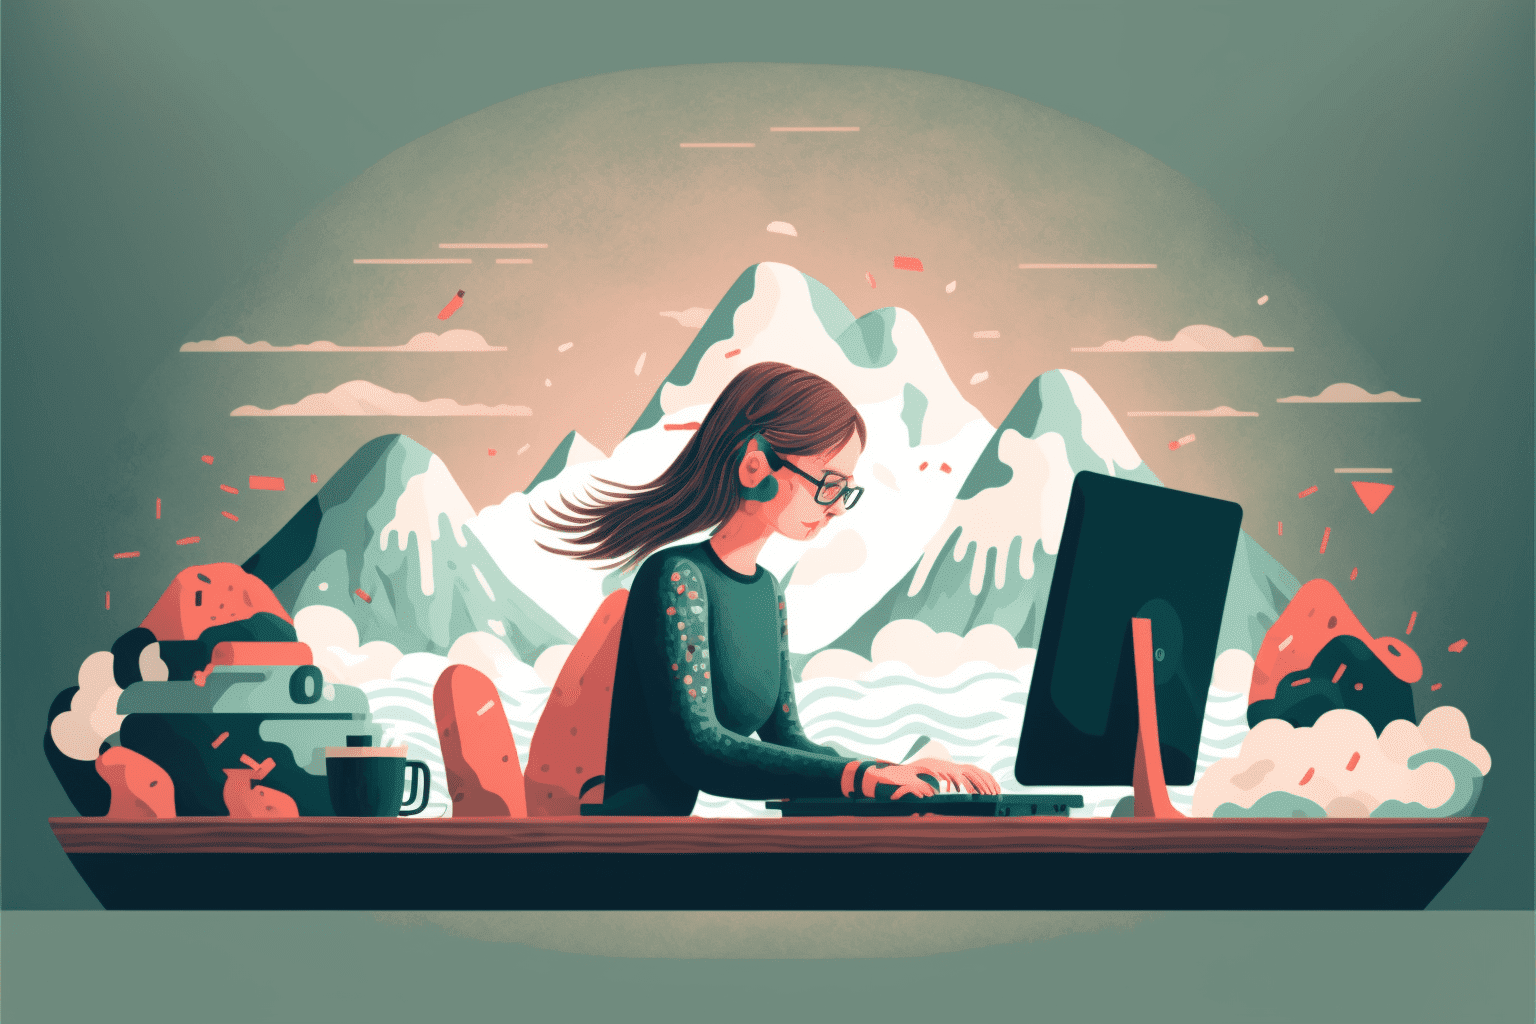 AI-created image of brunette girl working at laptop with mountains in background